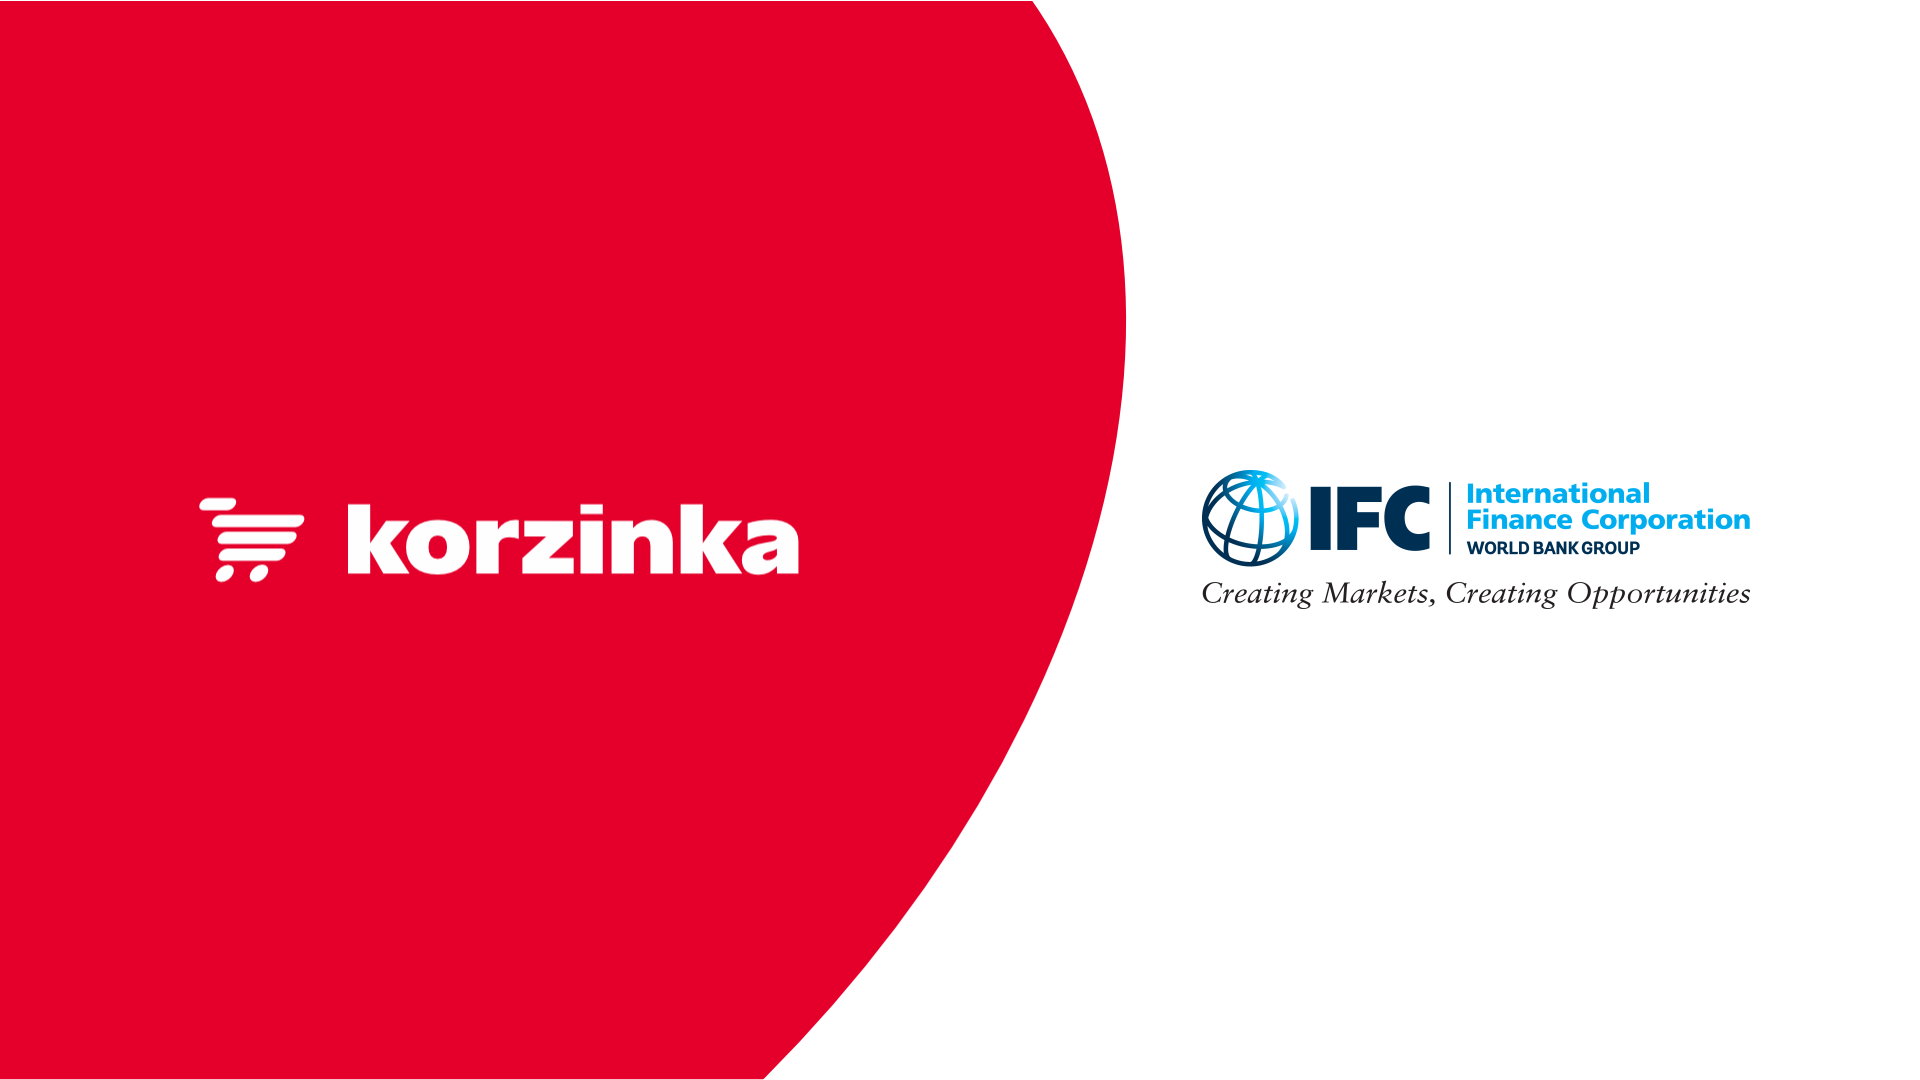 Korzinka secures $25mn Loan from IFC for new distribution center 